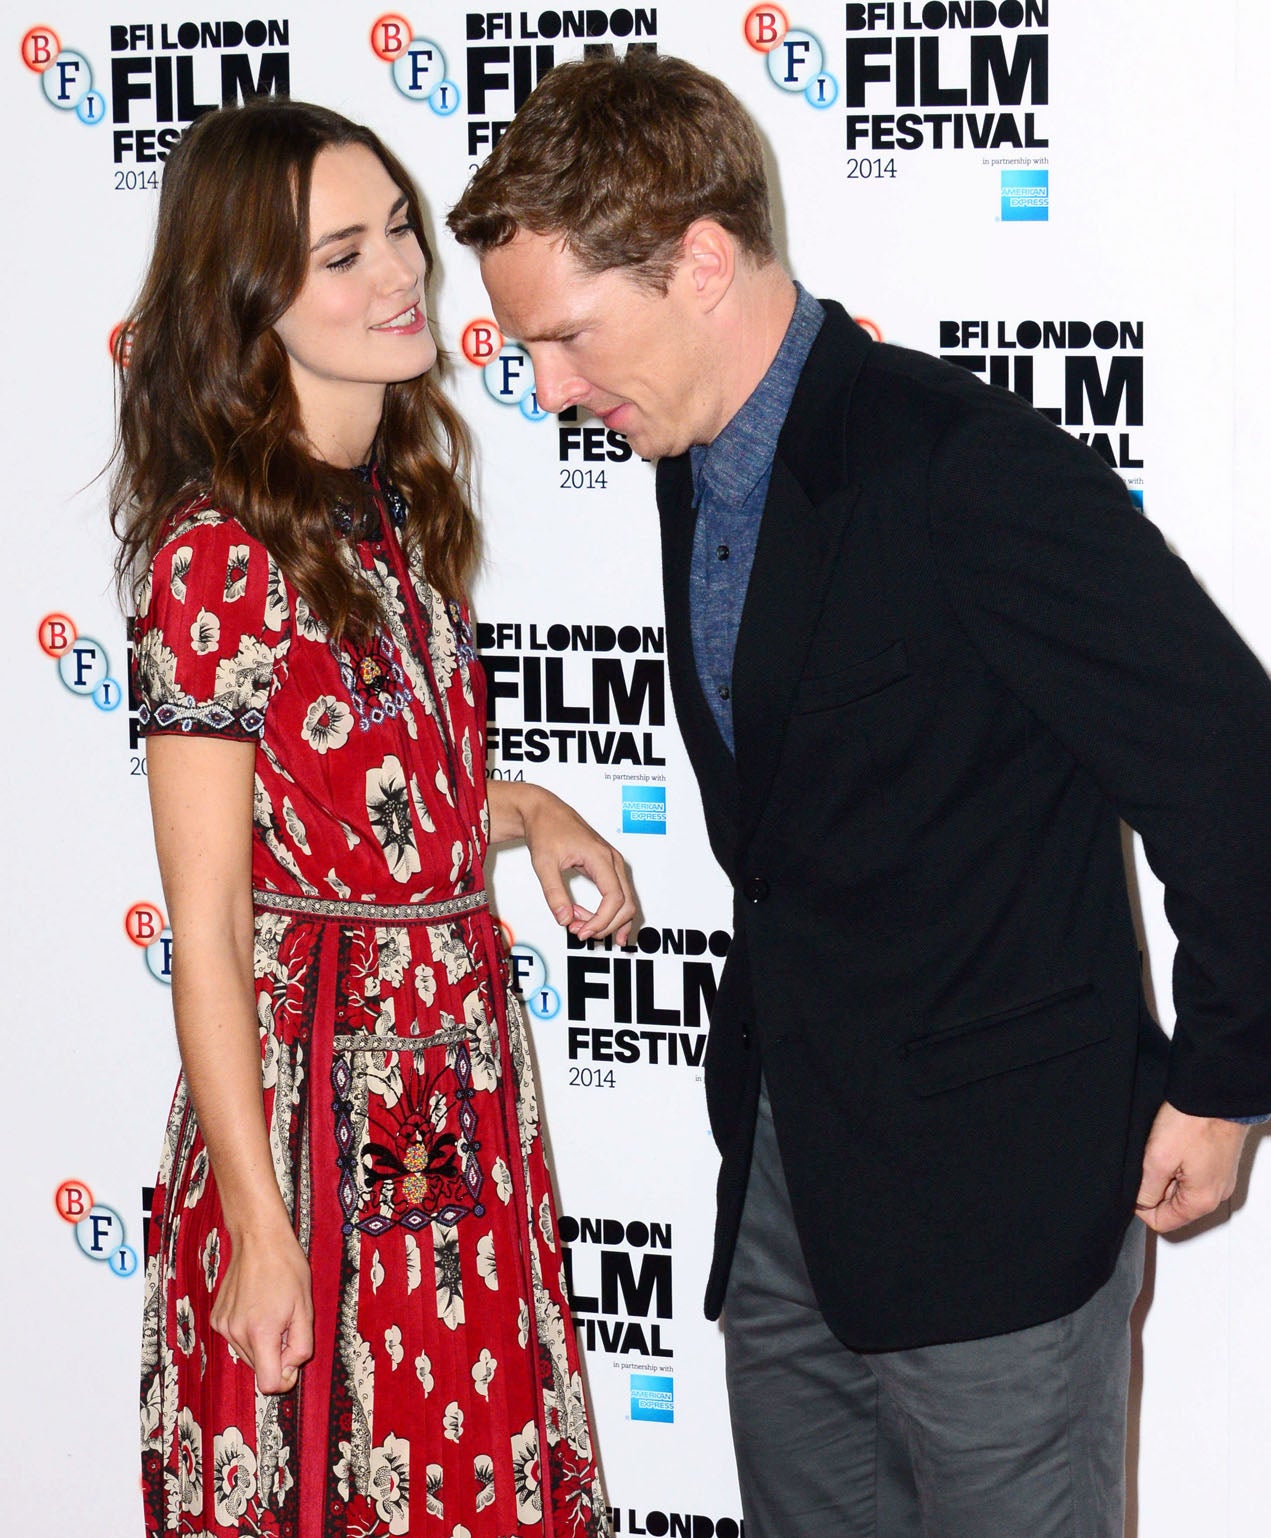 Keira Knightley and Benedict Cumberbatch at the premiere of The Imitation Game at the BFI London Film Festival